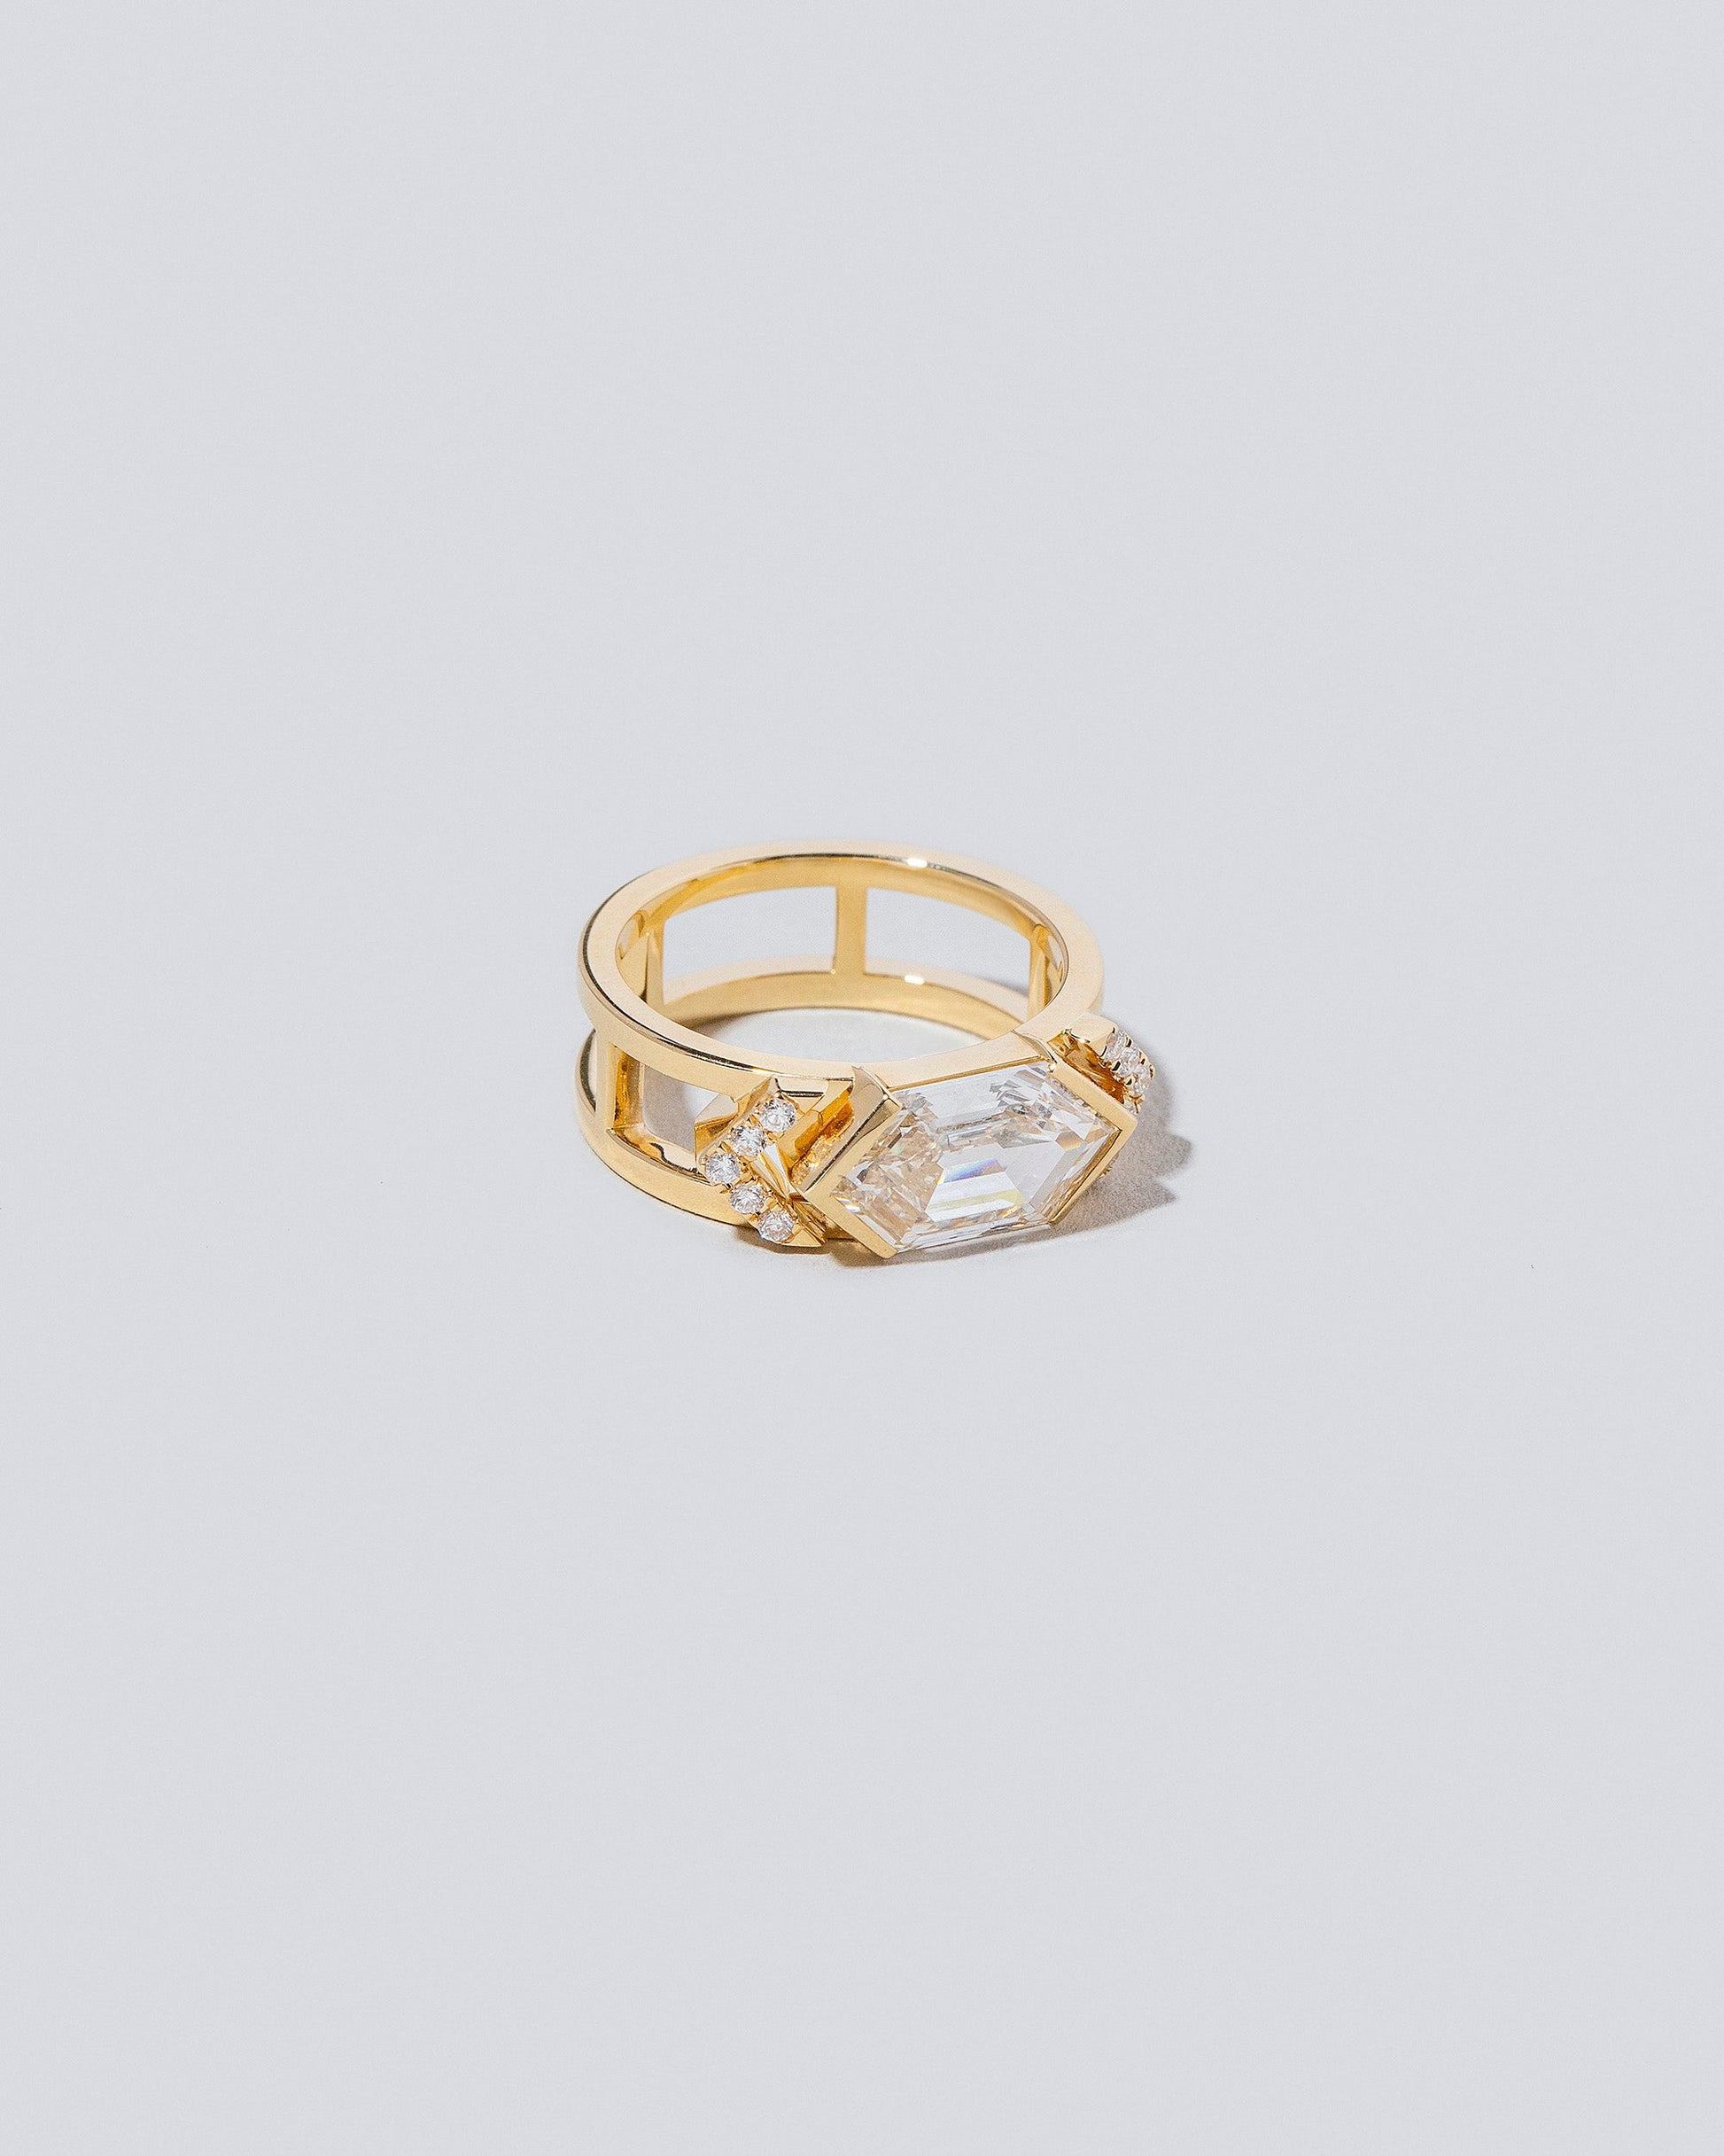  Empire Ring on light color background.